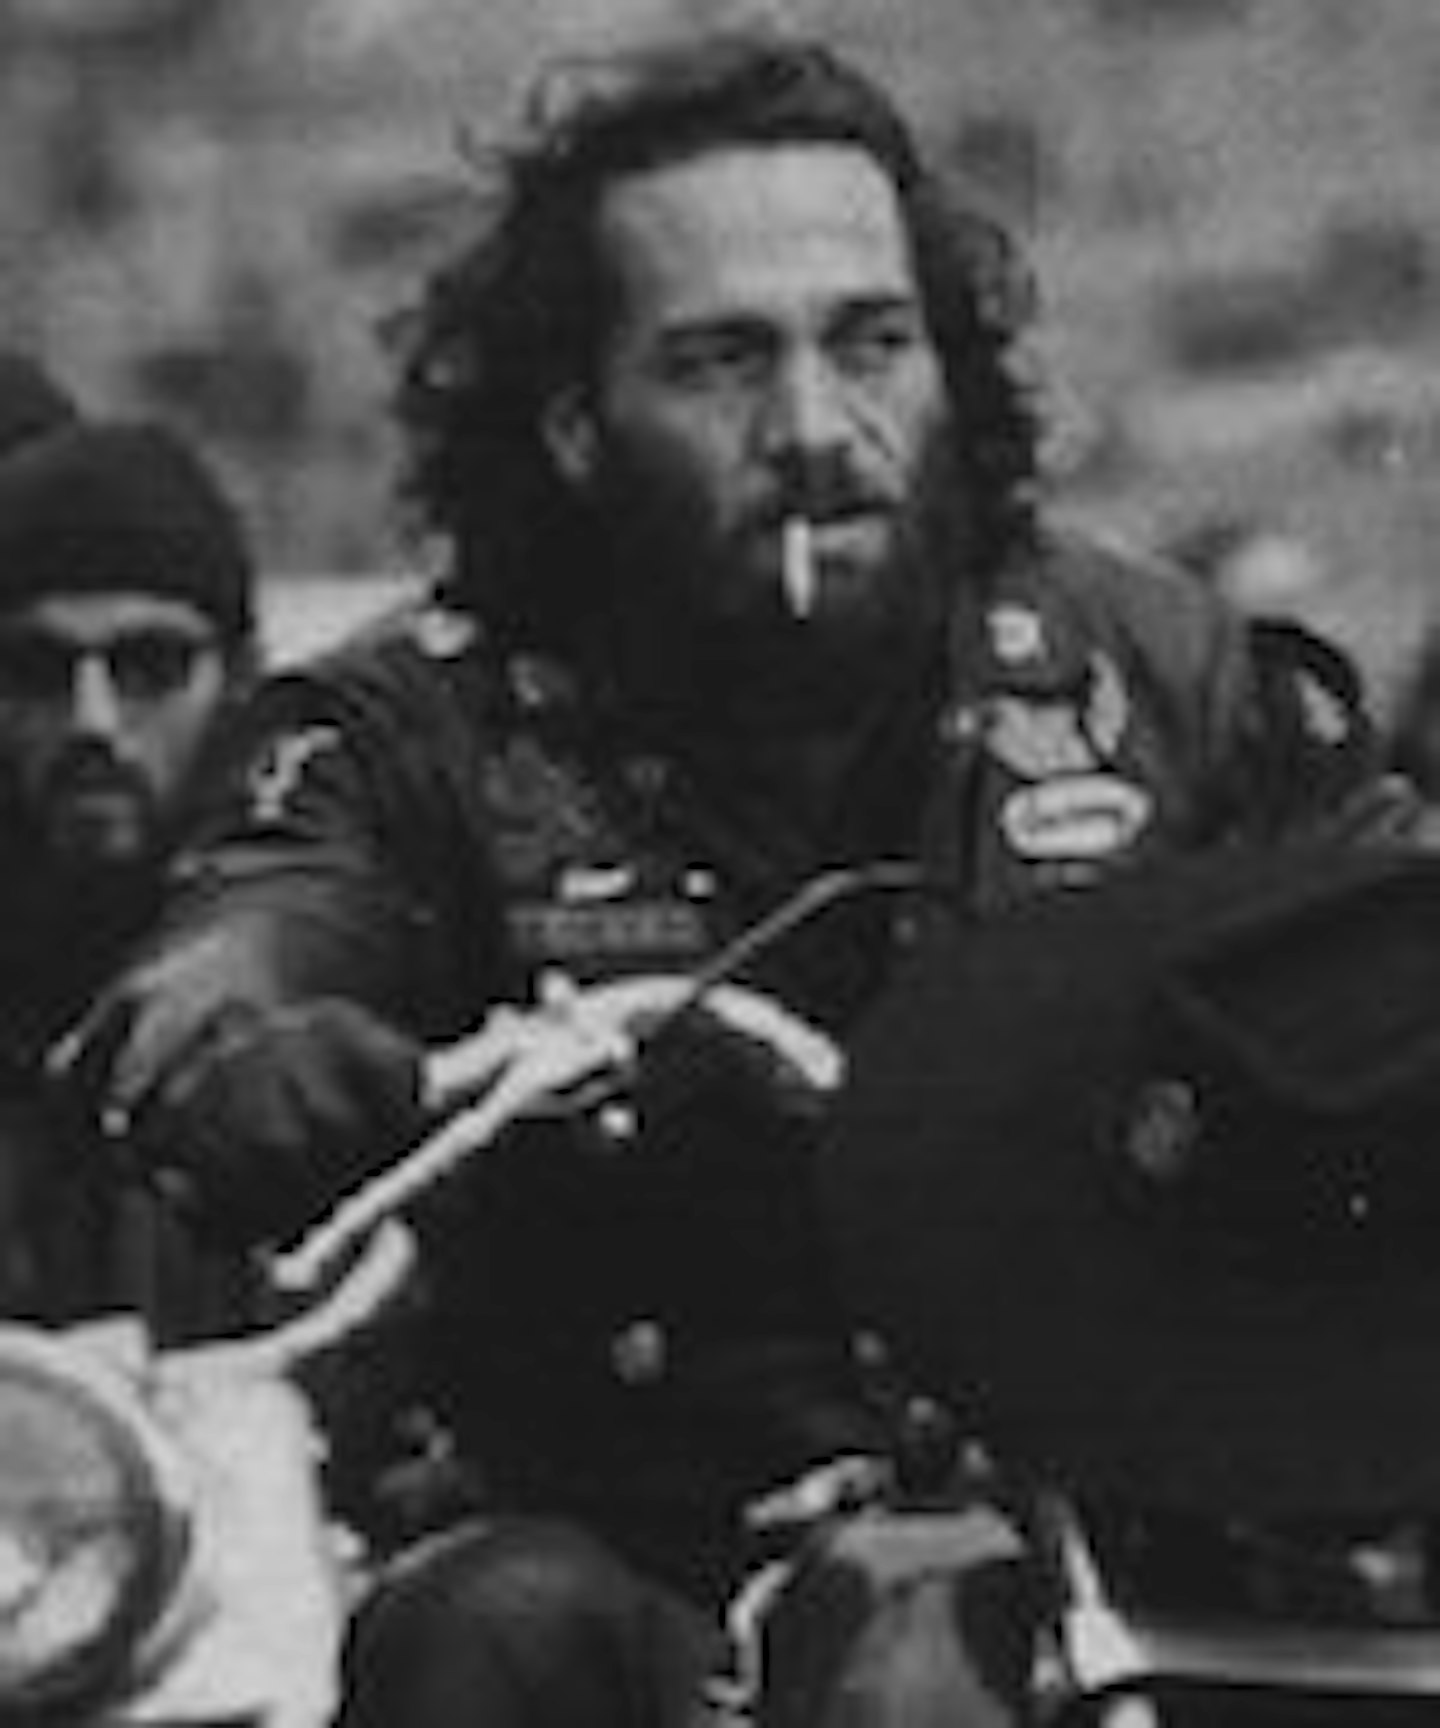 Rob Weiss Planning Biopic For The Hells Angels Founder